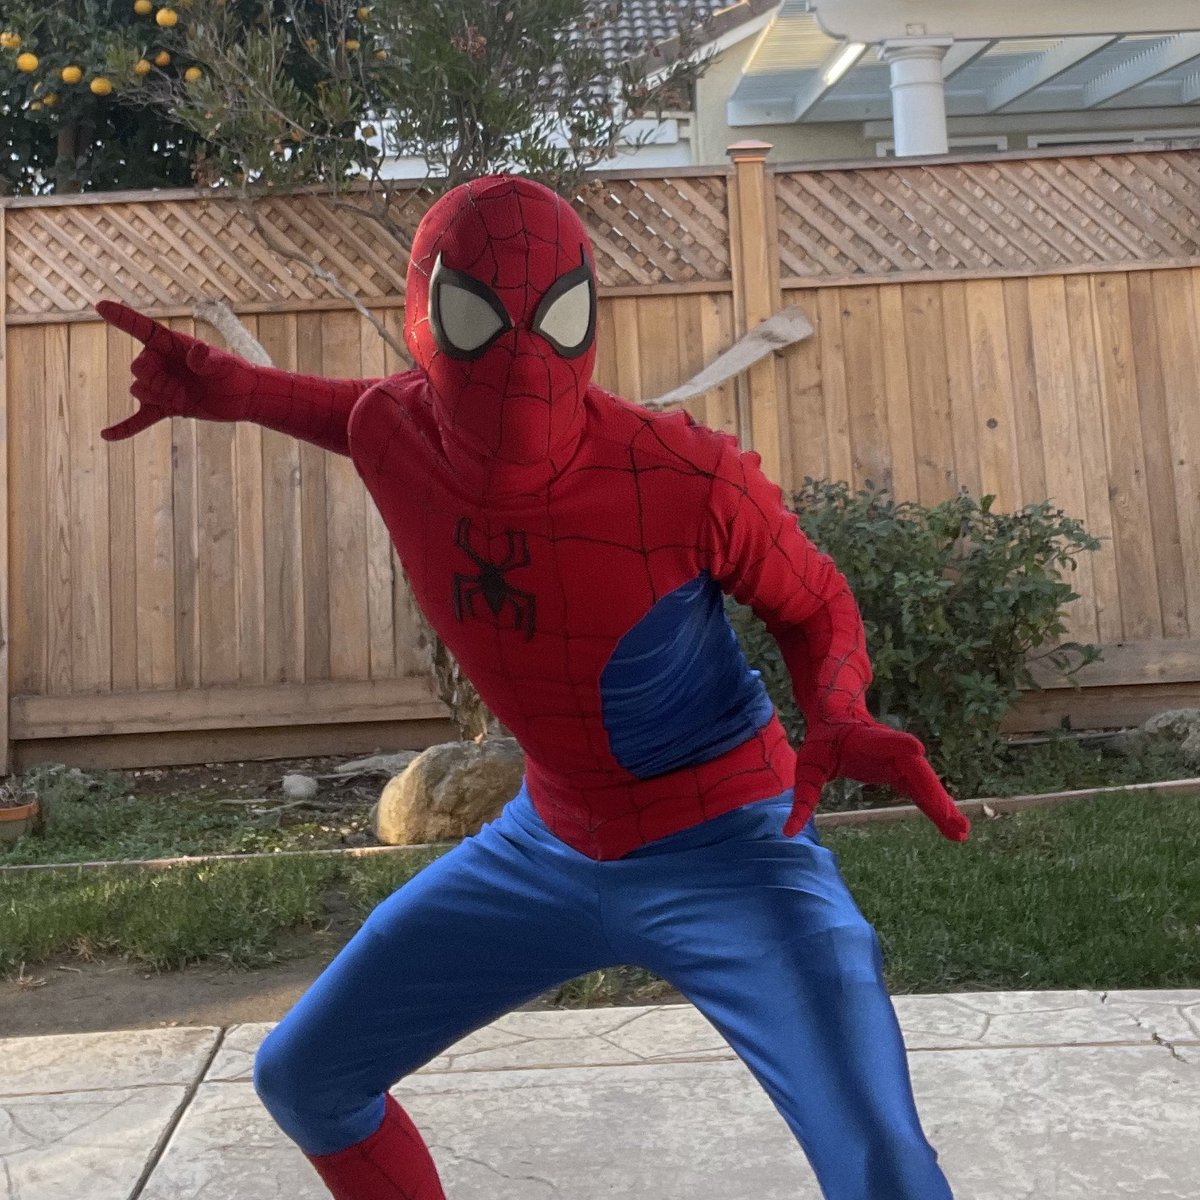 Nothing beats the Classics.

NEW SUIT DROPPED‼️This is the suit the Astonishing Spider-Man wears BEFORE the Astonishing suit was crafted. More formally known as the Classic suit.

Suit commissioned by my buddy Sacramento Spider!
#SpiderMan #SpiderManCosplay #Marvel